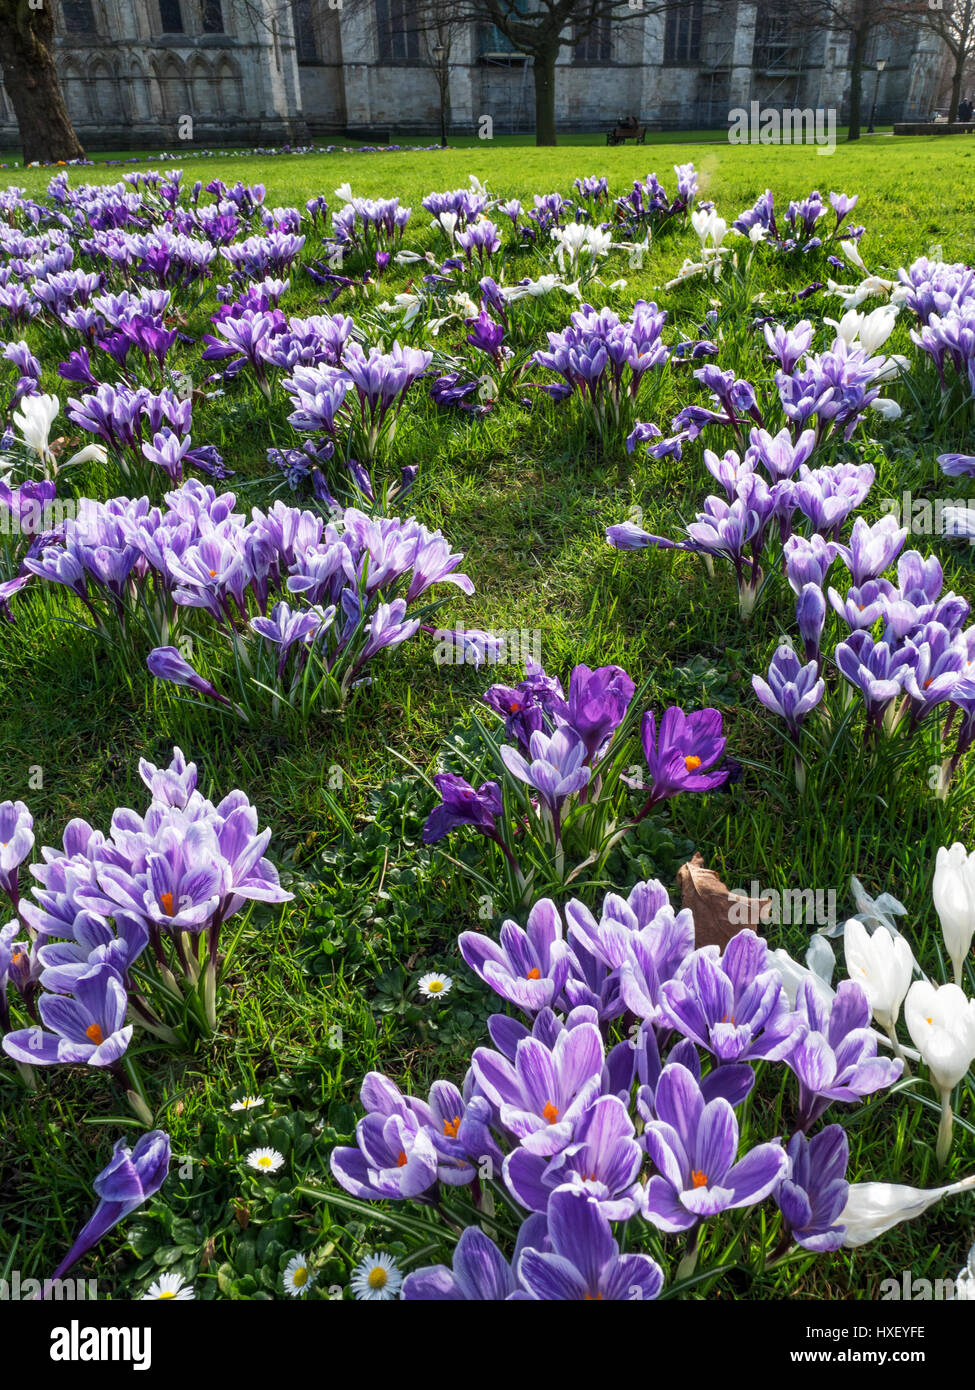 Crocuses in Spring near the Minster in Deans Park York Yorkshire England Stock Photo